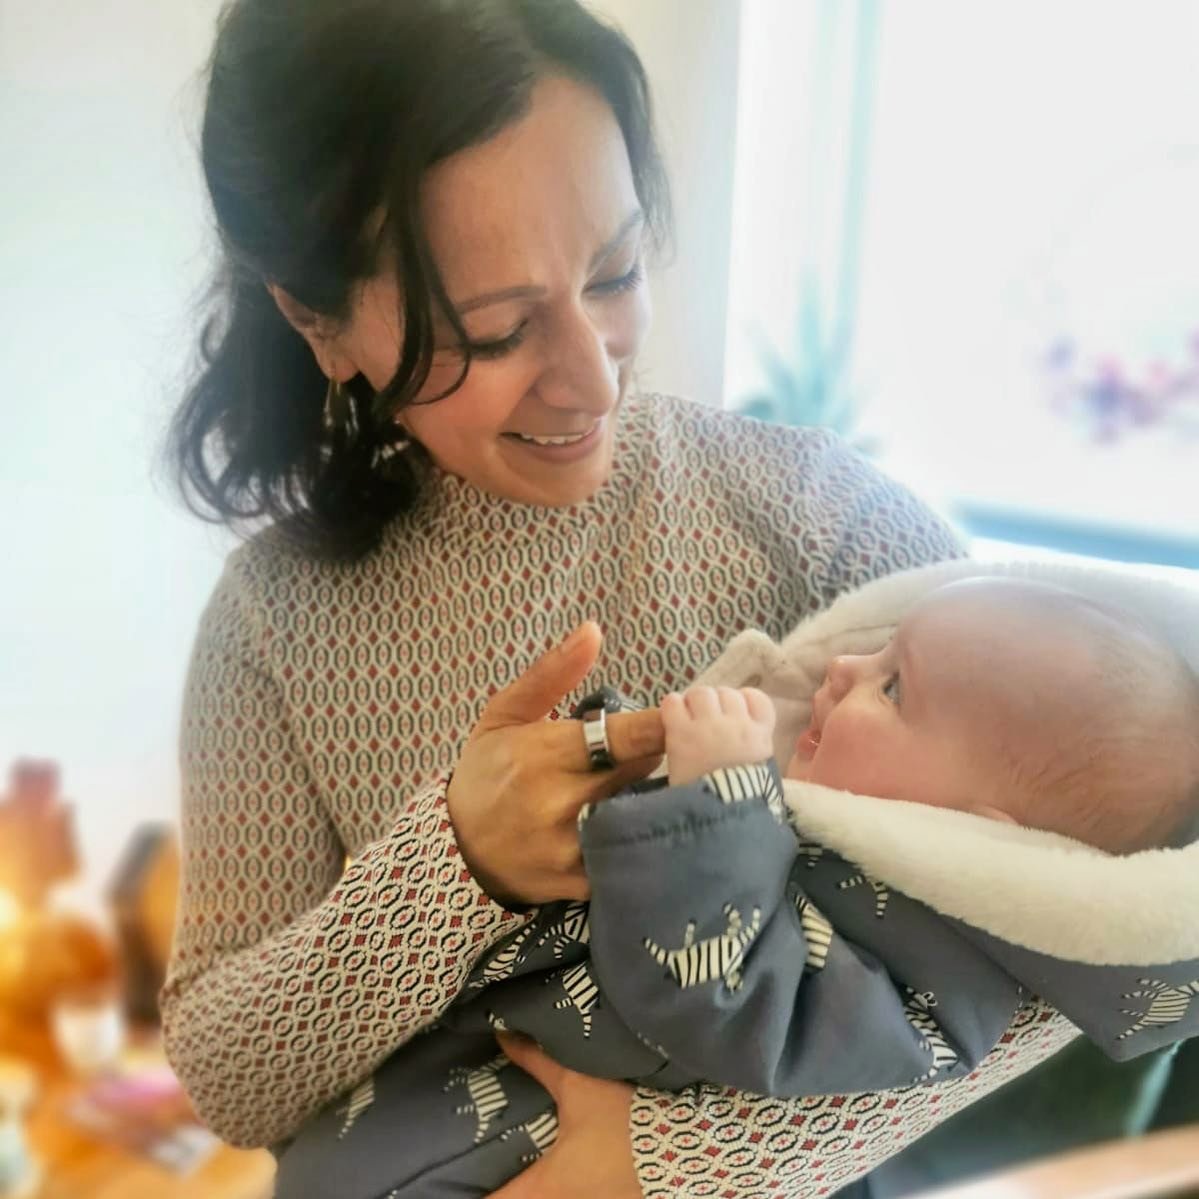 Today, I had the greatest pleasure in meeting little Ruby. I can&rsquo;t actually describe the excitement I felt getting out of bed today, knowing I was getting to meet her. 😍

Ruby and her parents journey to get here was challenging and complex but